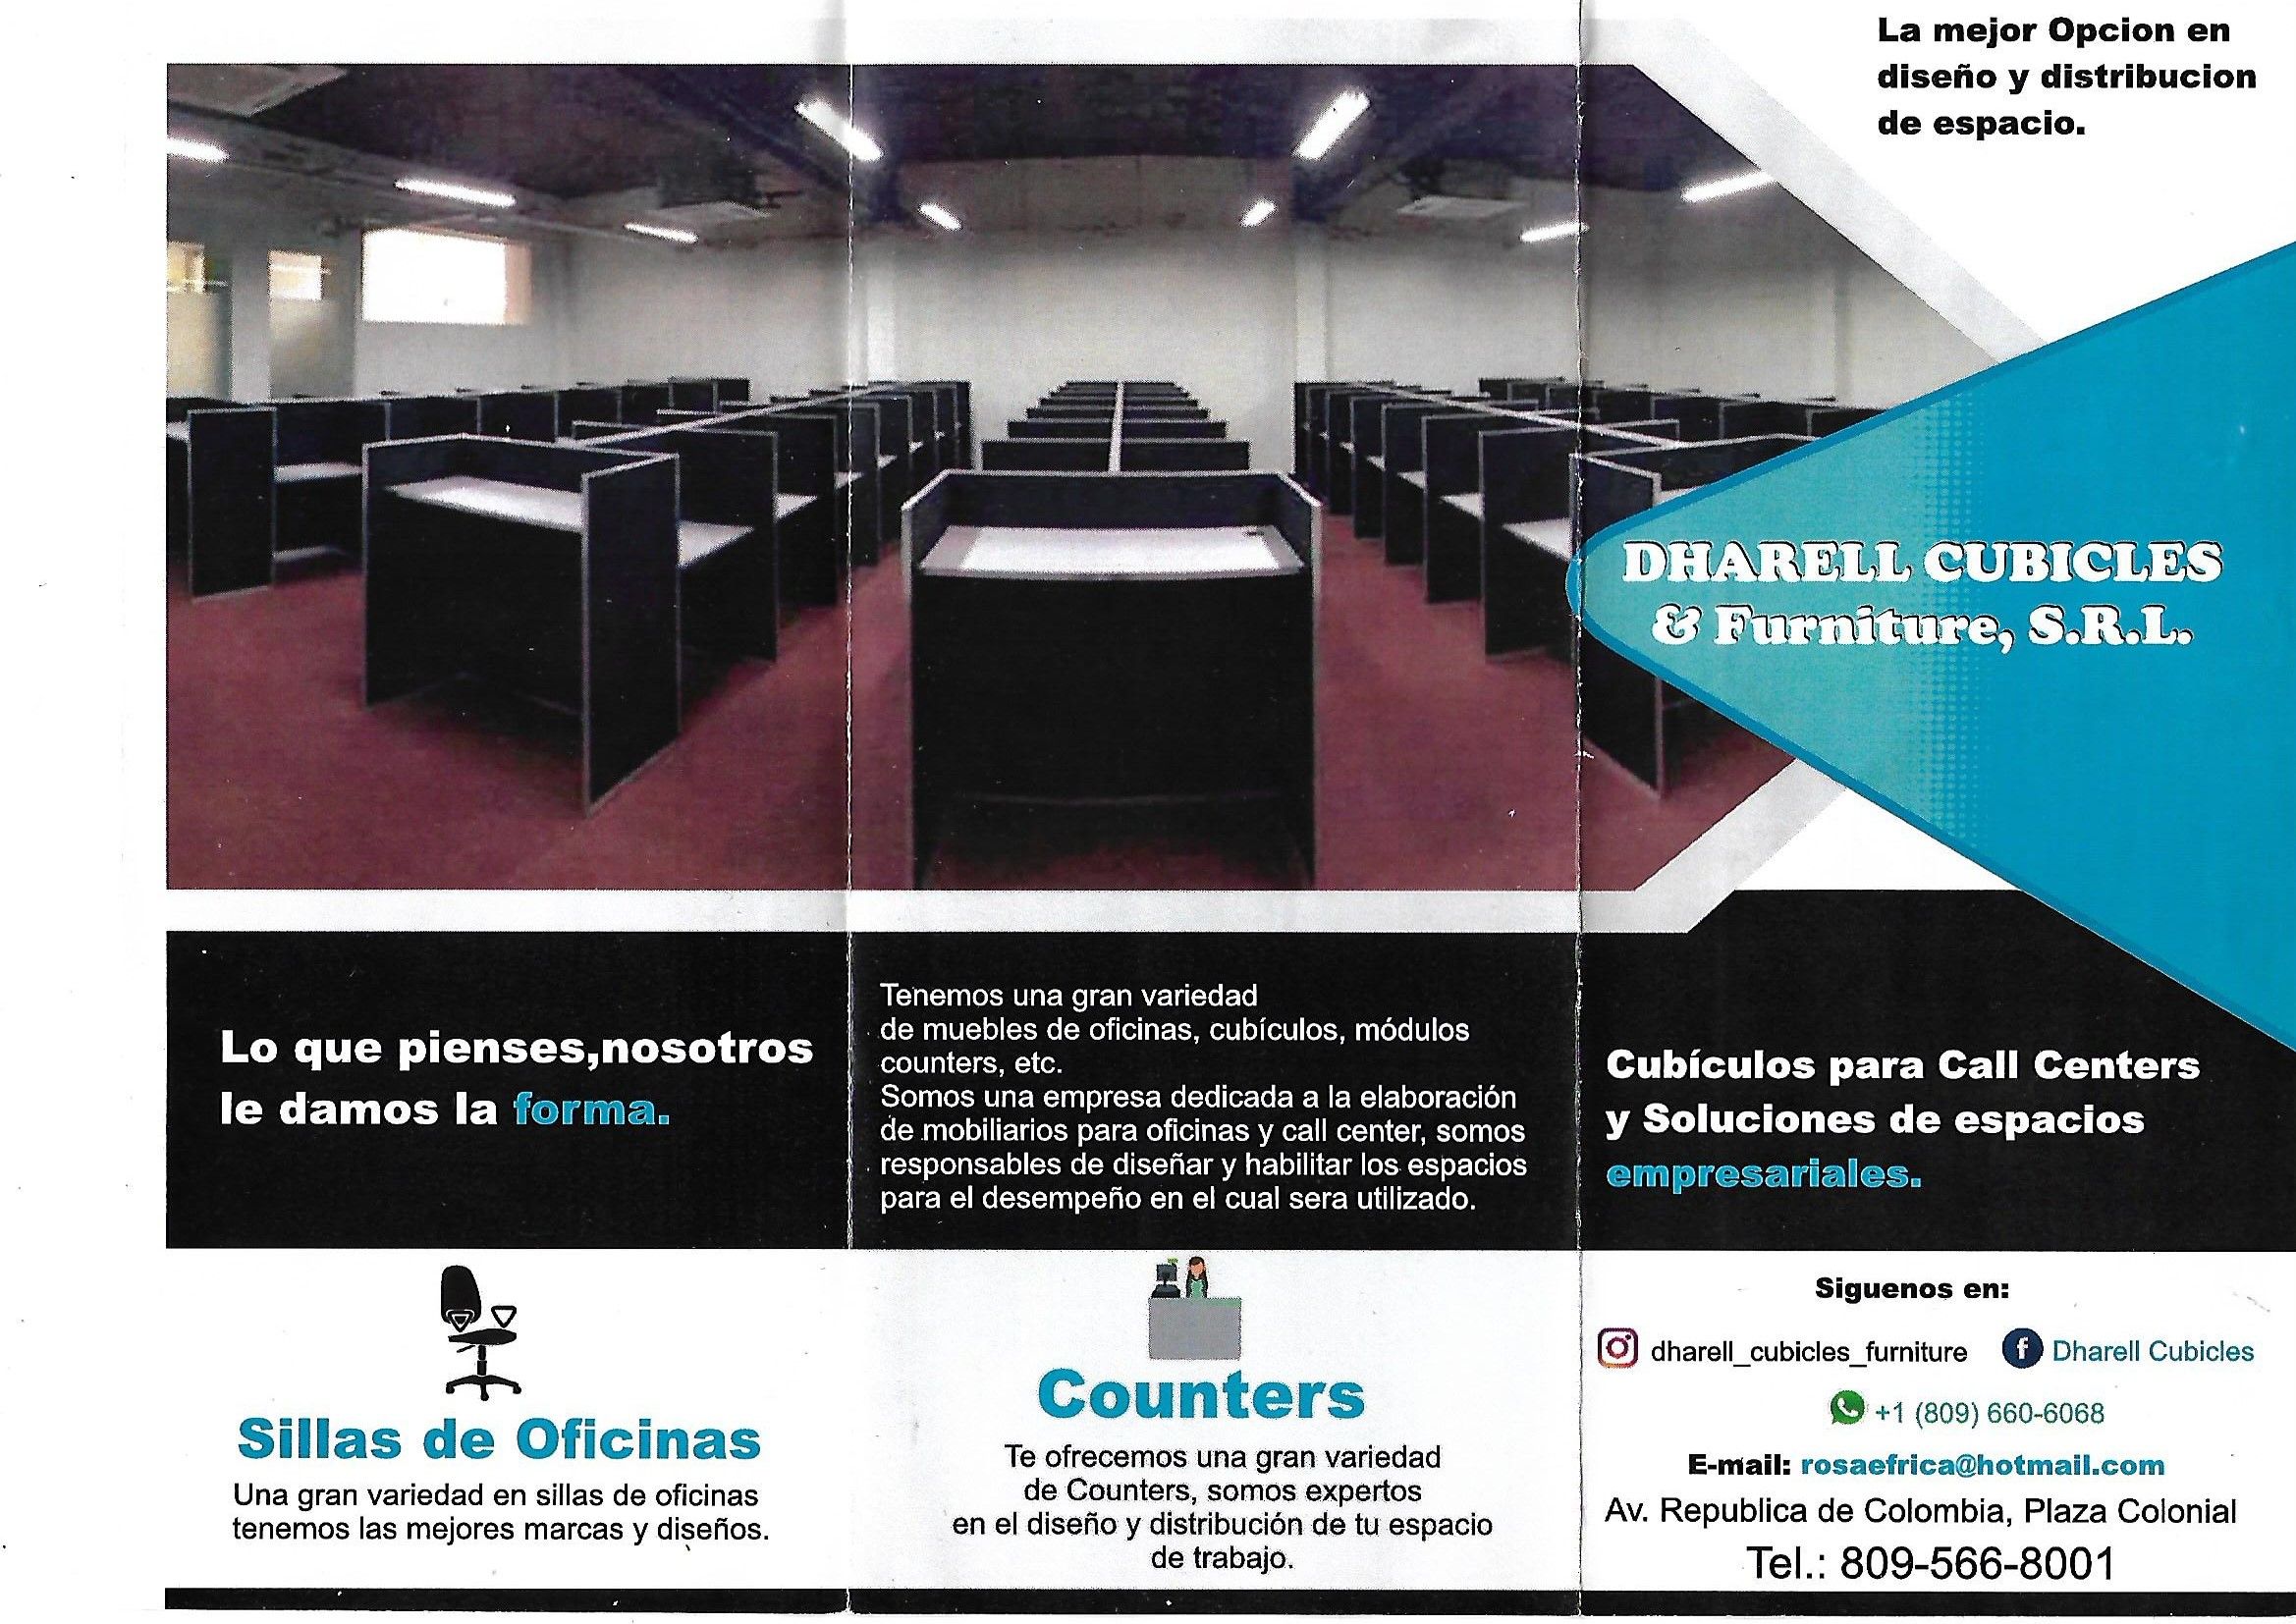 Dharell Cubicles & Furniture